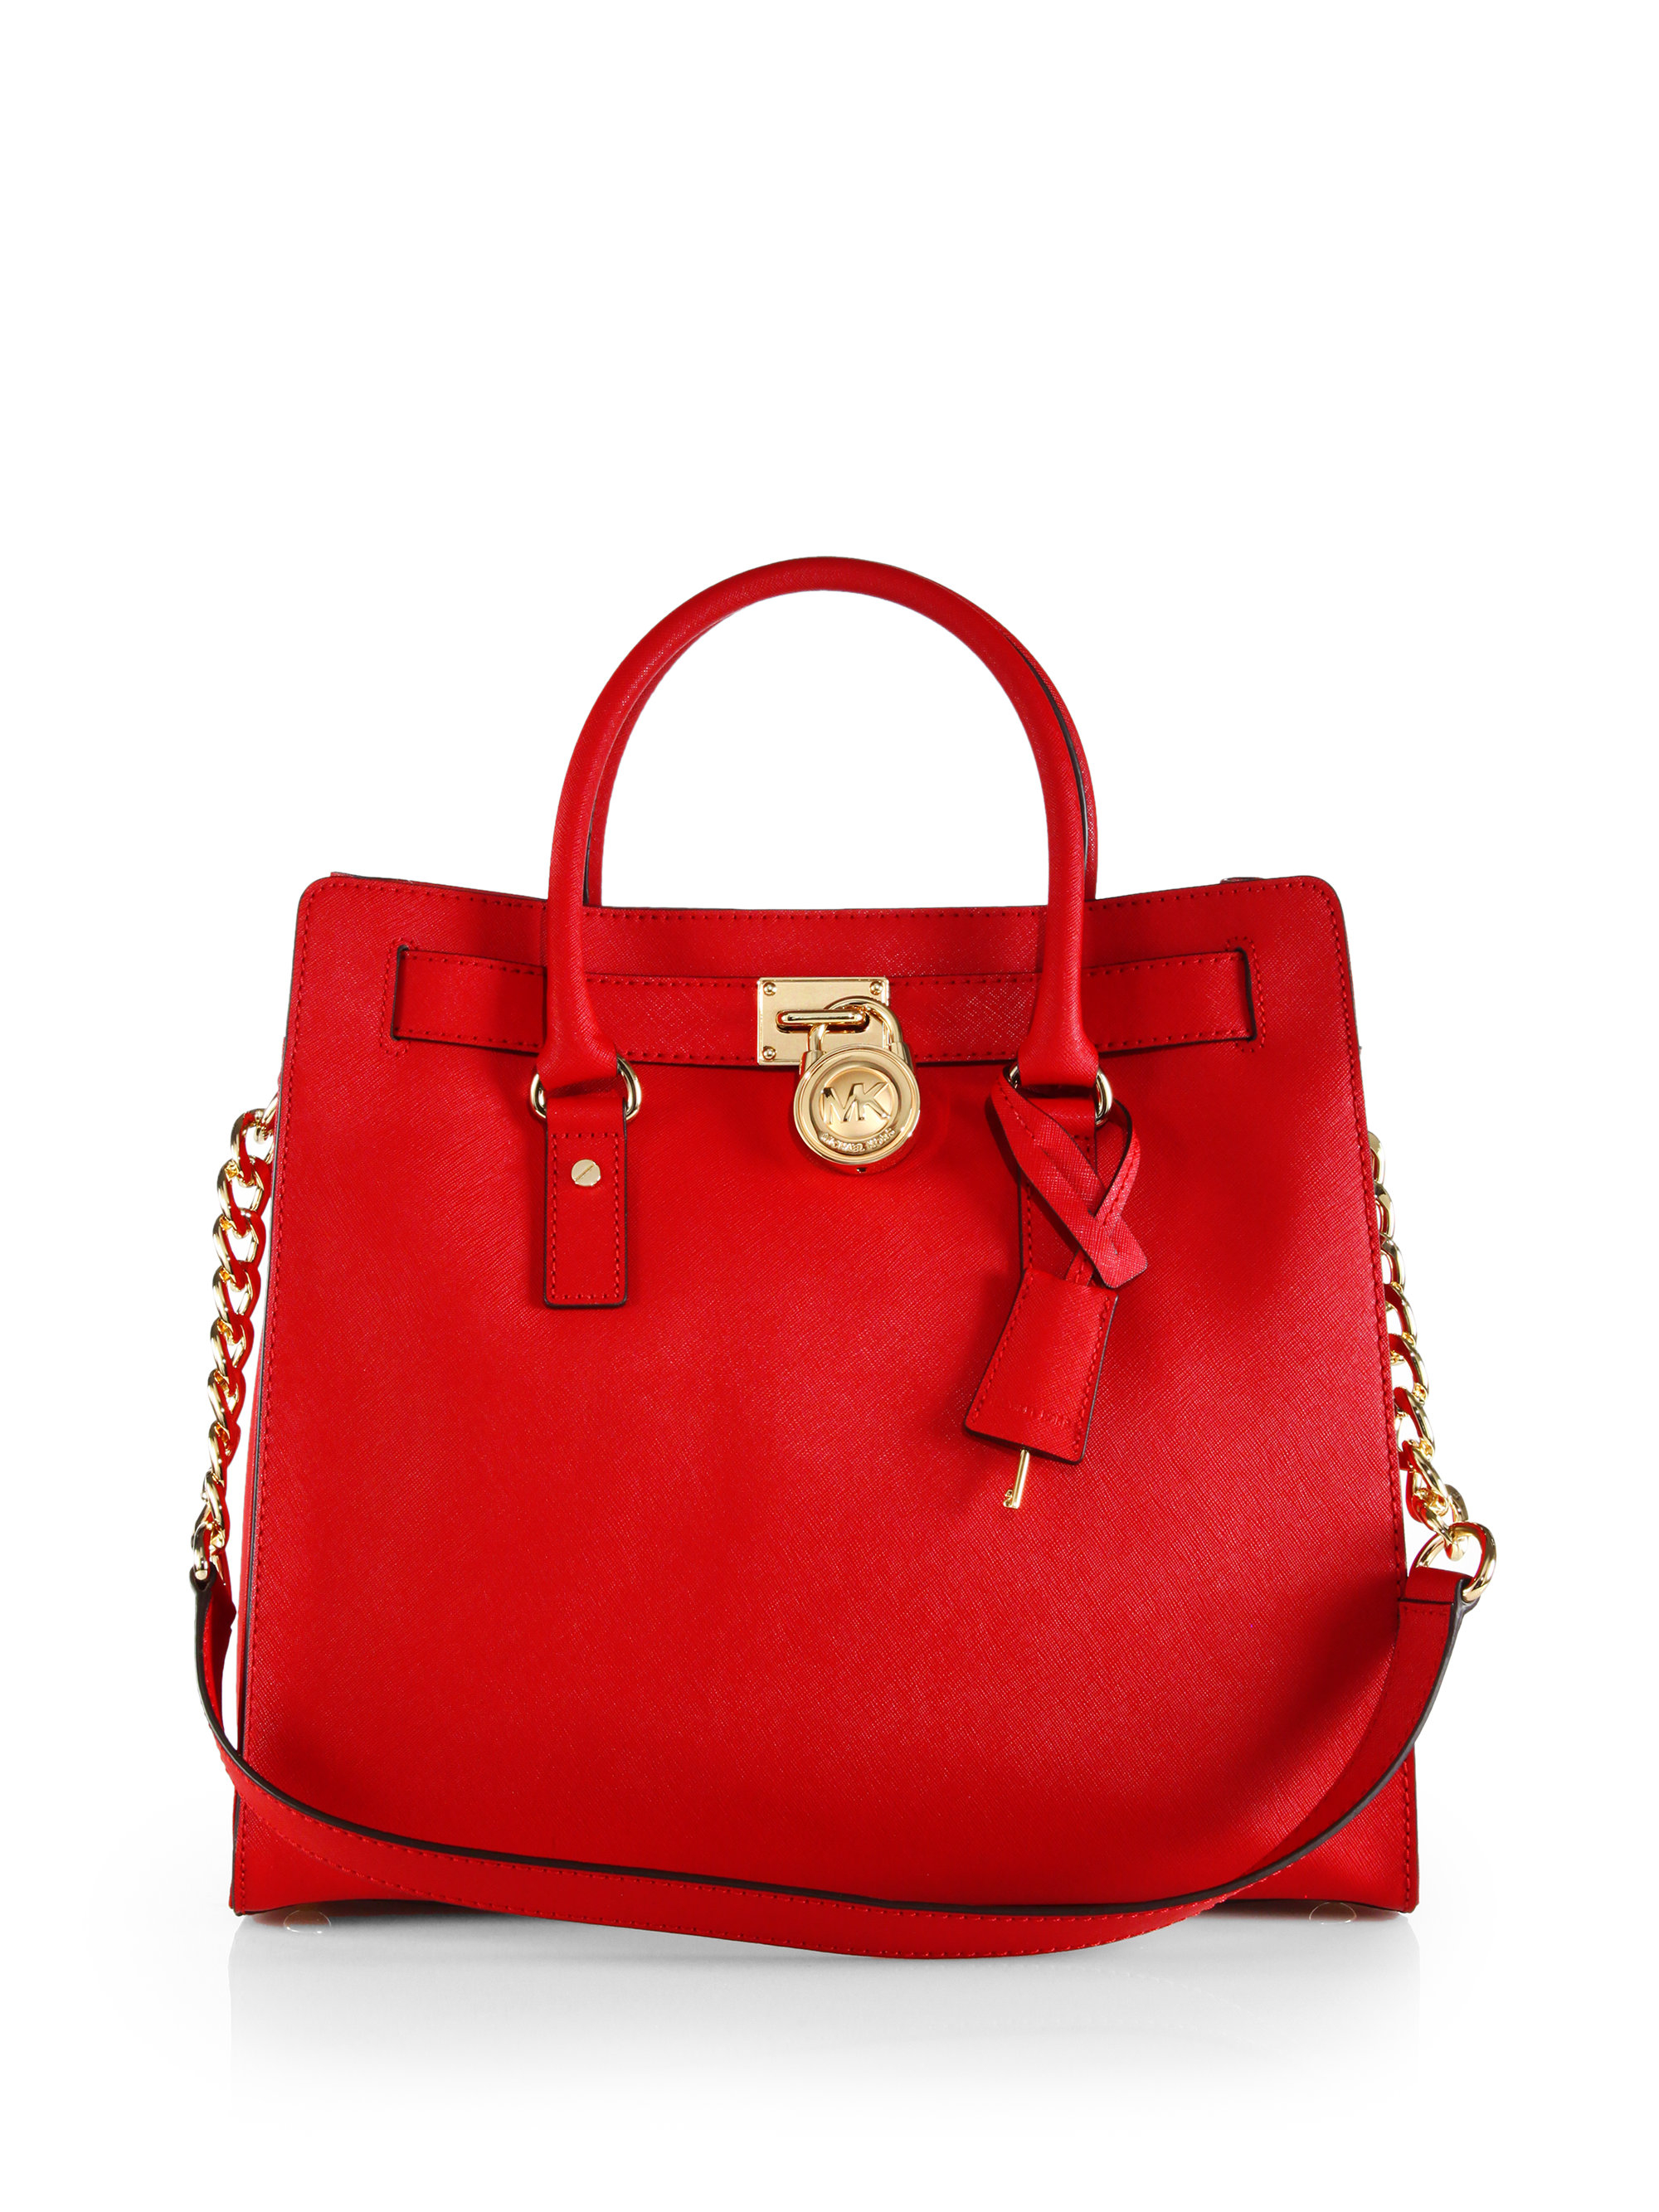 Lyst - Michael Michael Kors Hamilton Large Tote in Red